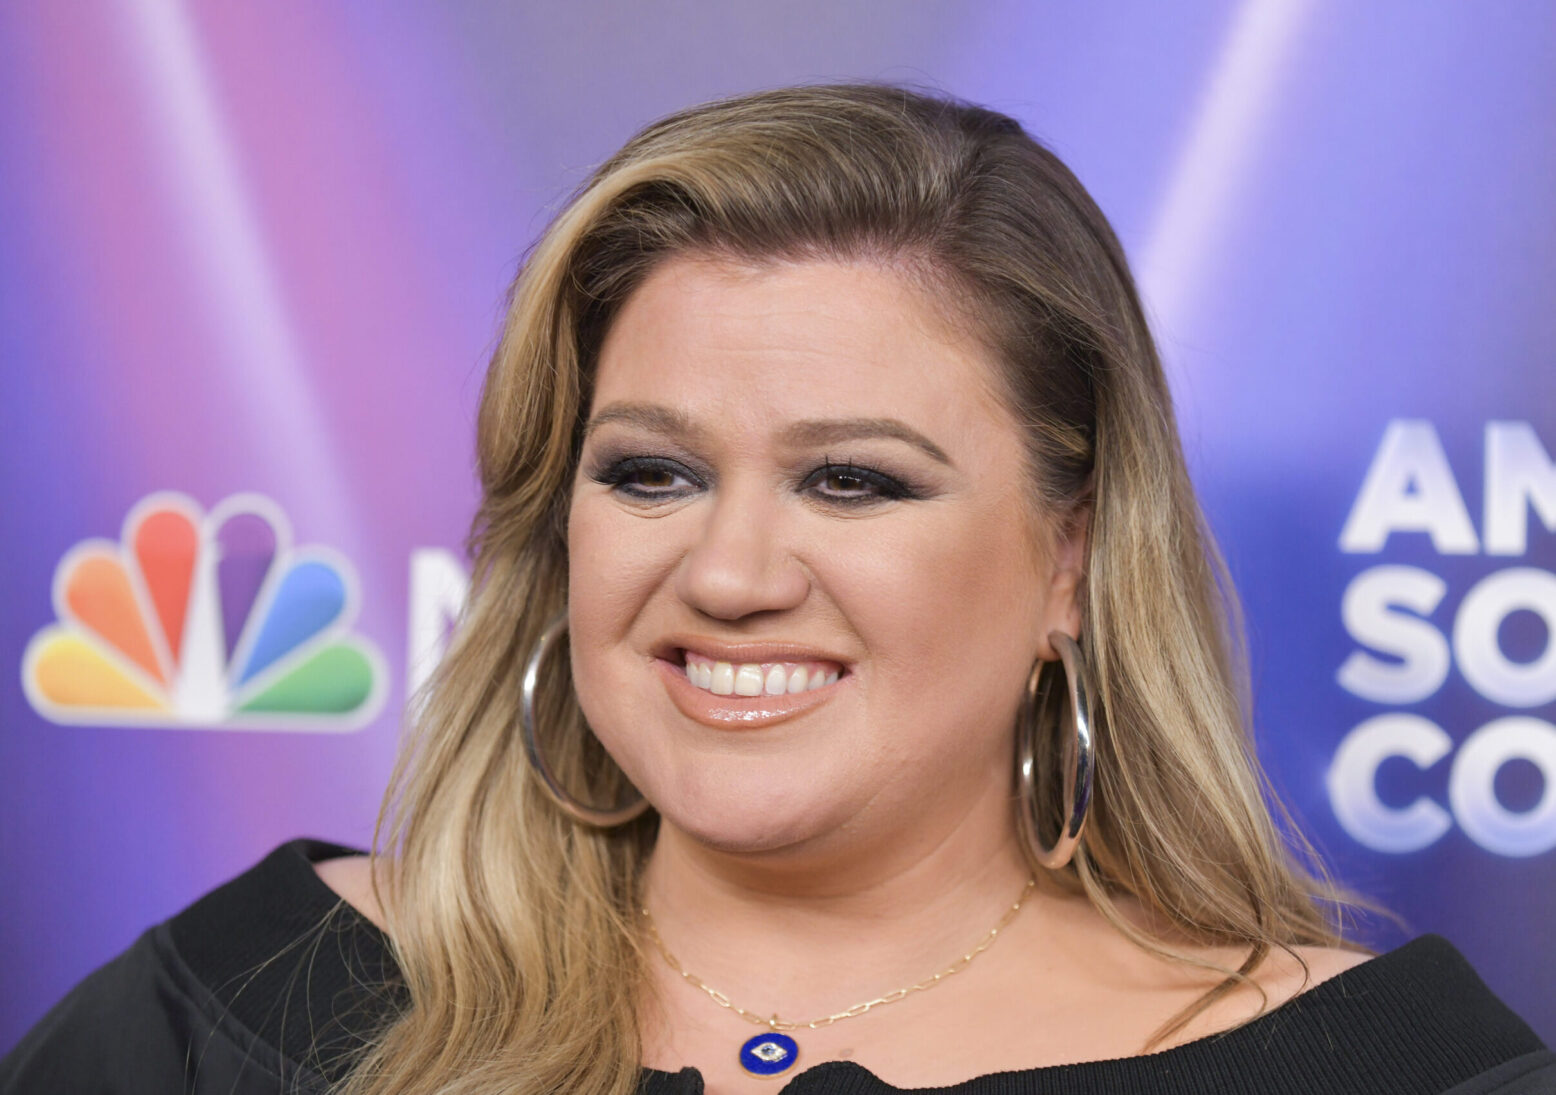 Kelly Clarkson New Album Chemistry Is About Past Relationship 4510